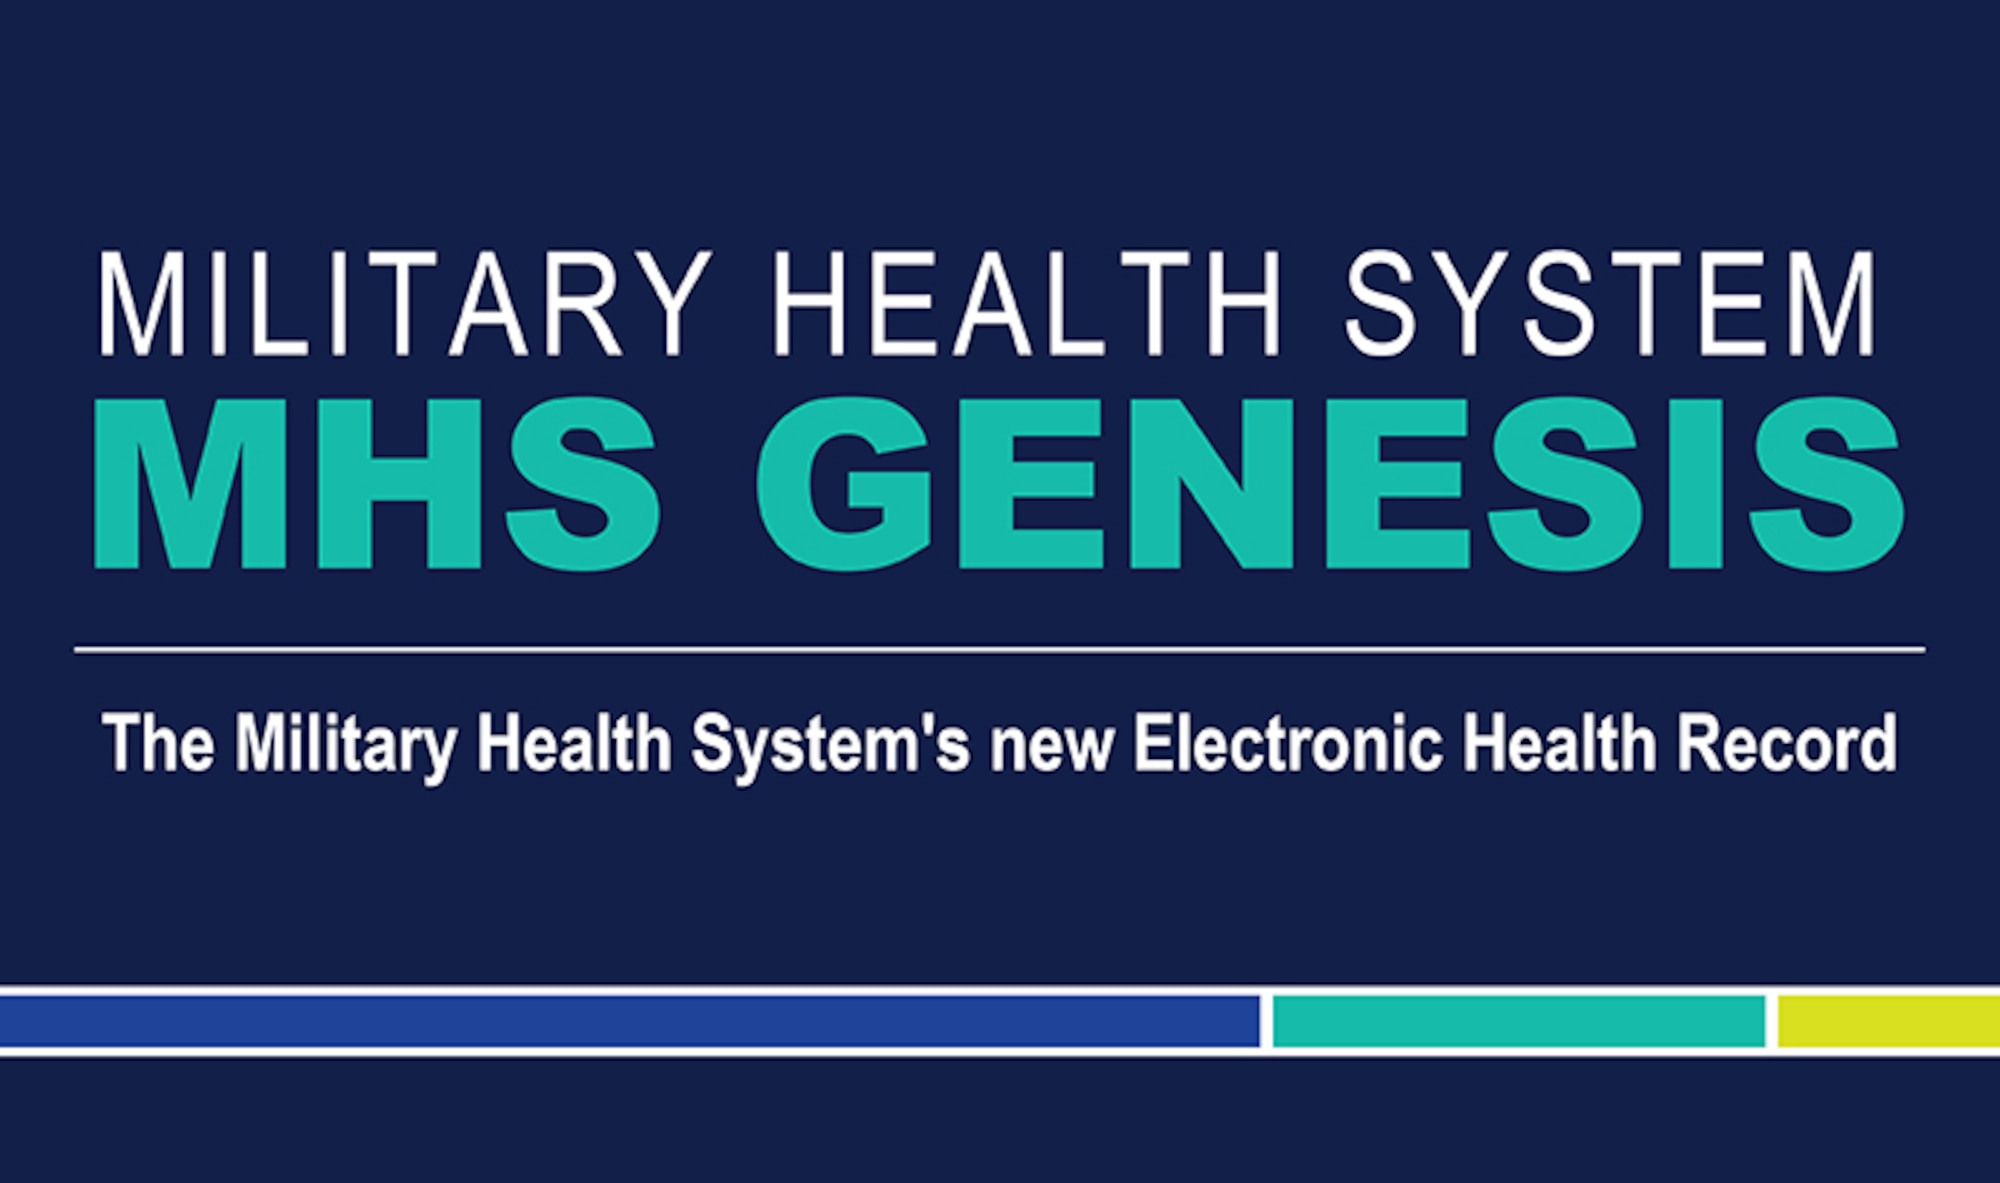 Military Health System MHS GENESIS graphic